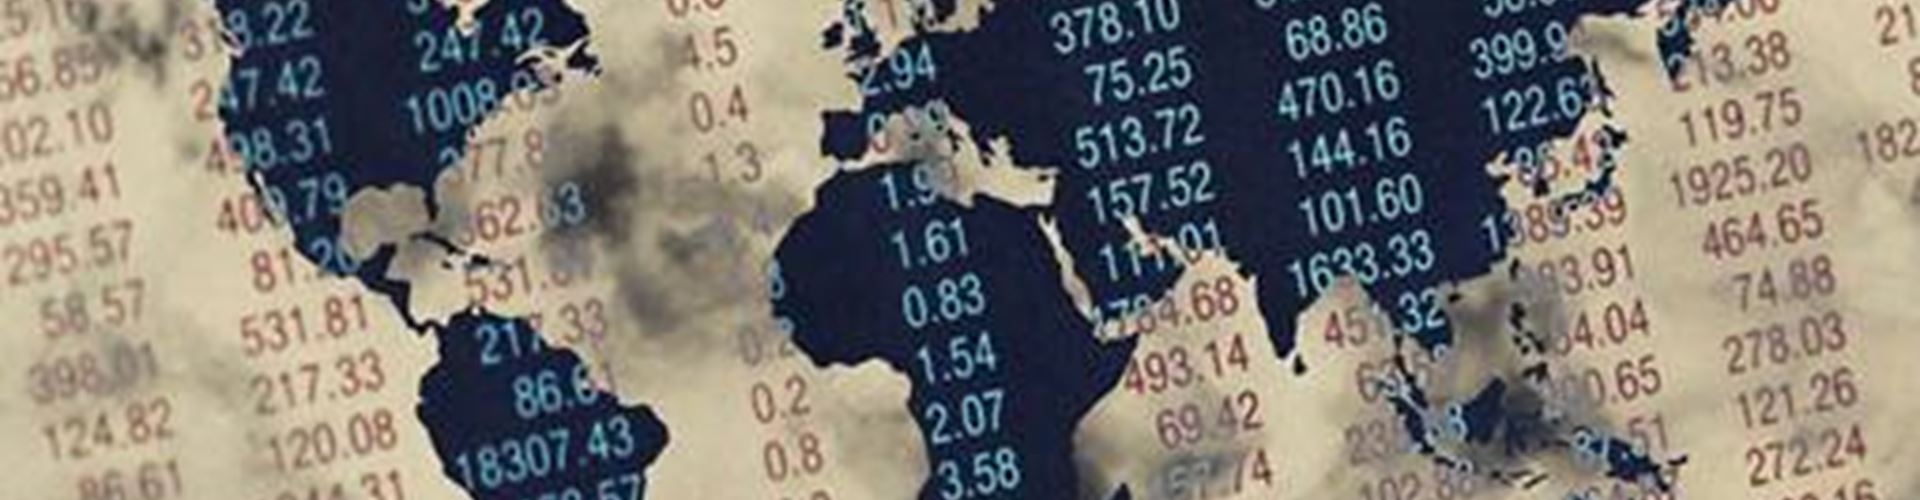 Emerging markets suffer £600bn outflow of funds